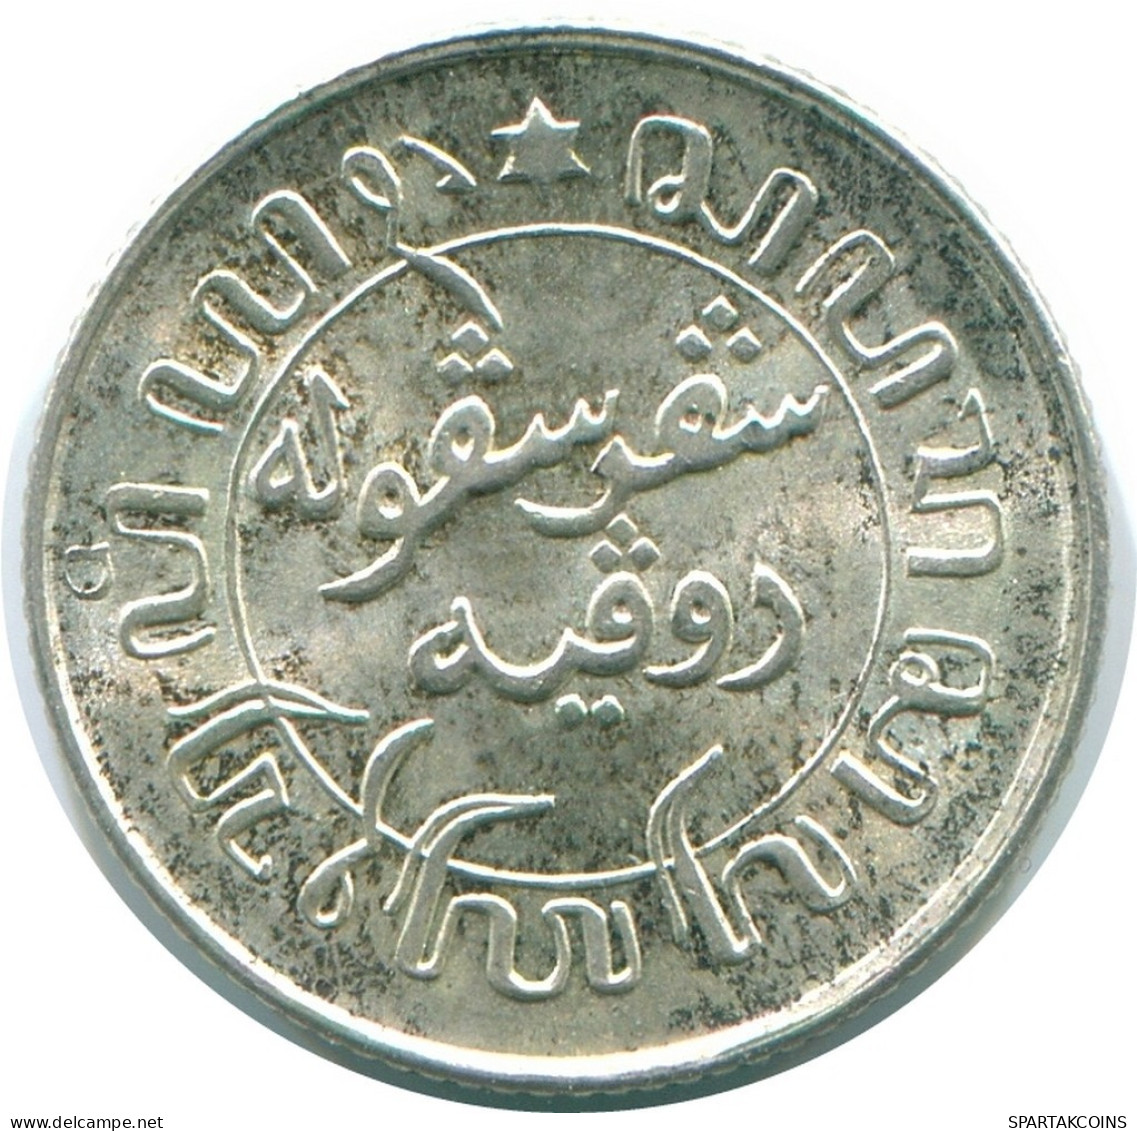 1/10 GULDEN 1945 S NETHERLANDS EAST INDIES SILVER Colonial Coin #NL14107.3.U.A - Indes Neerlandesas